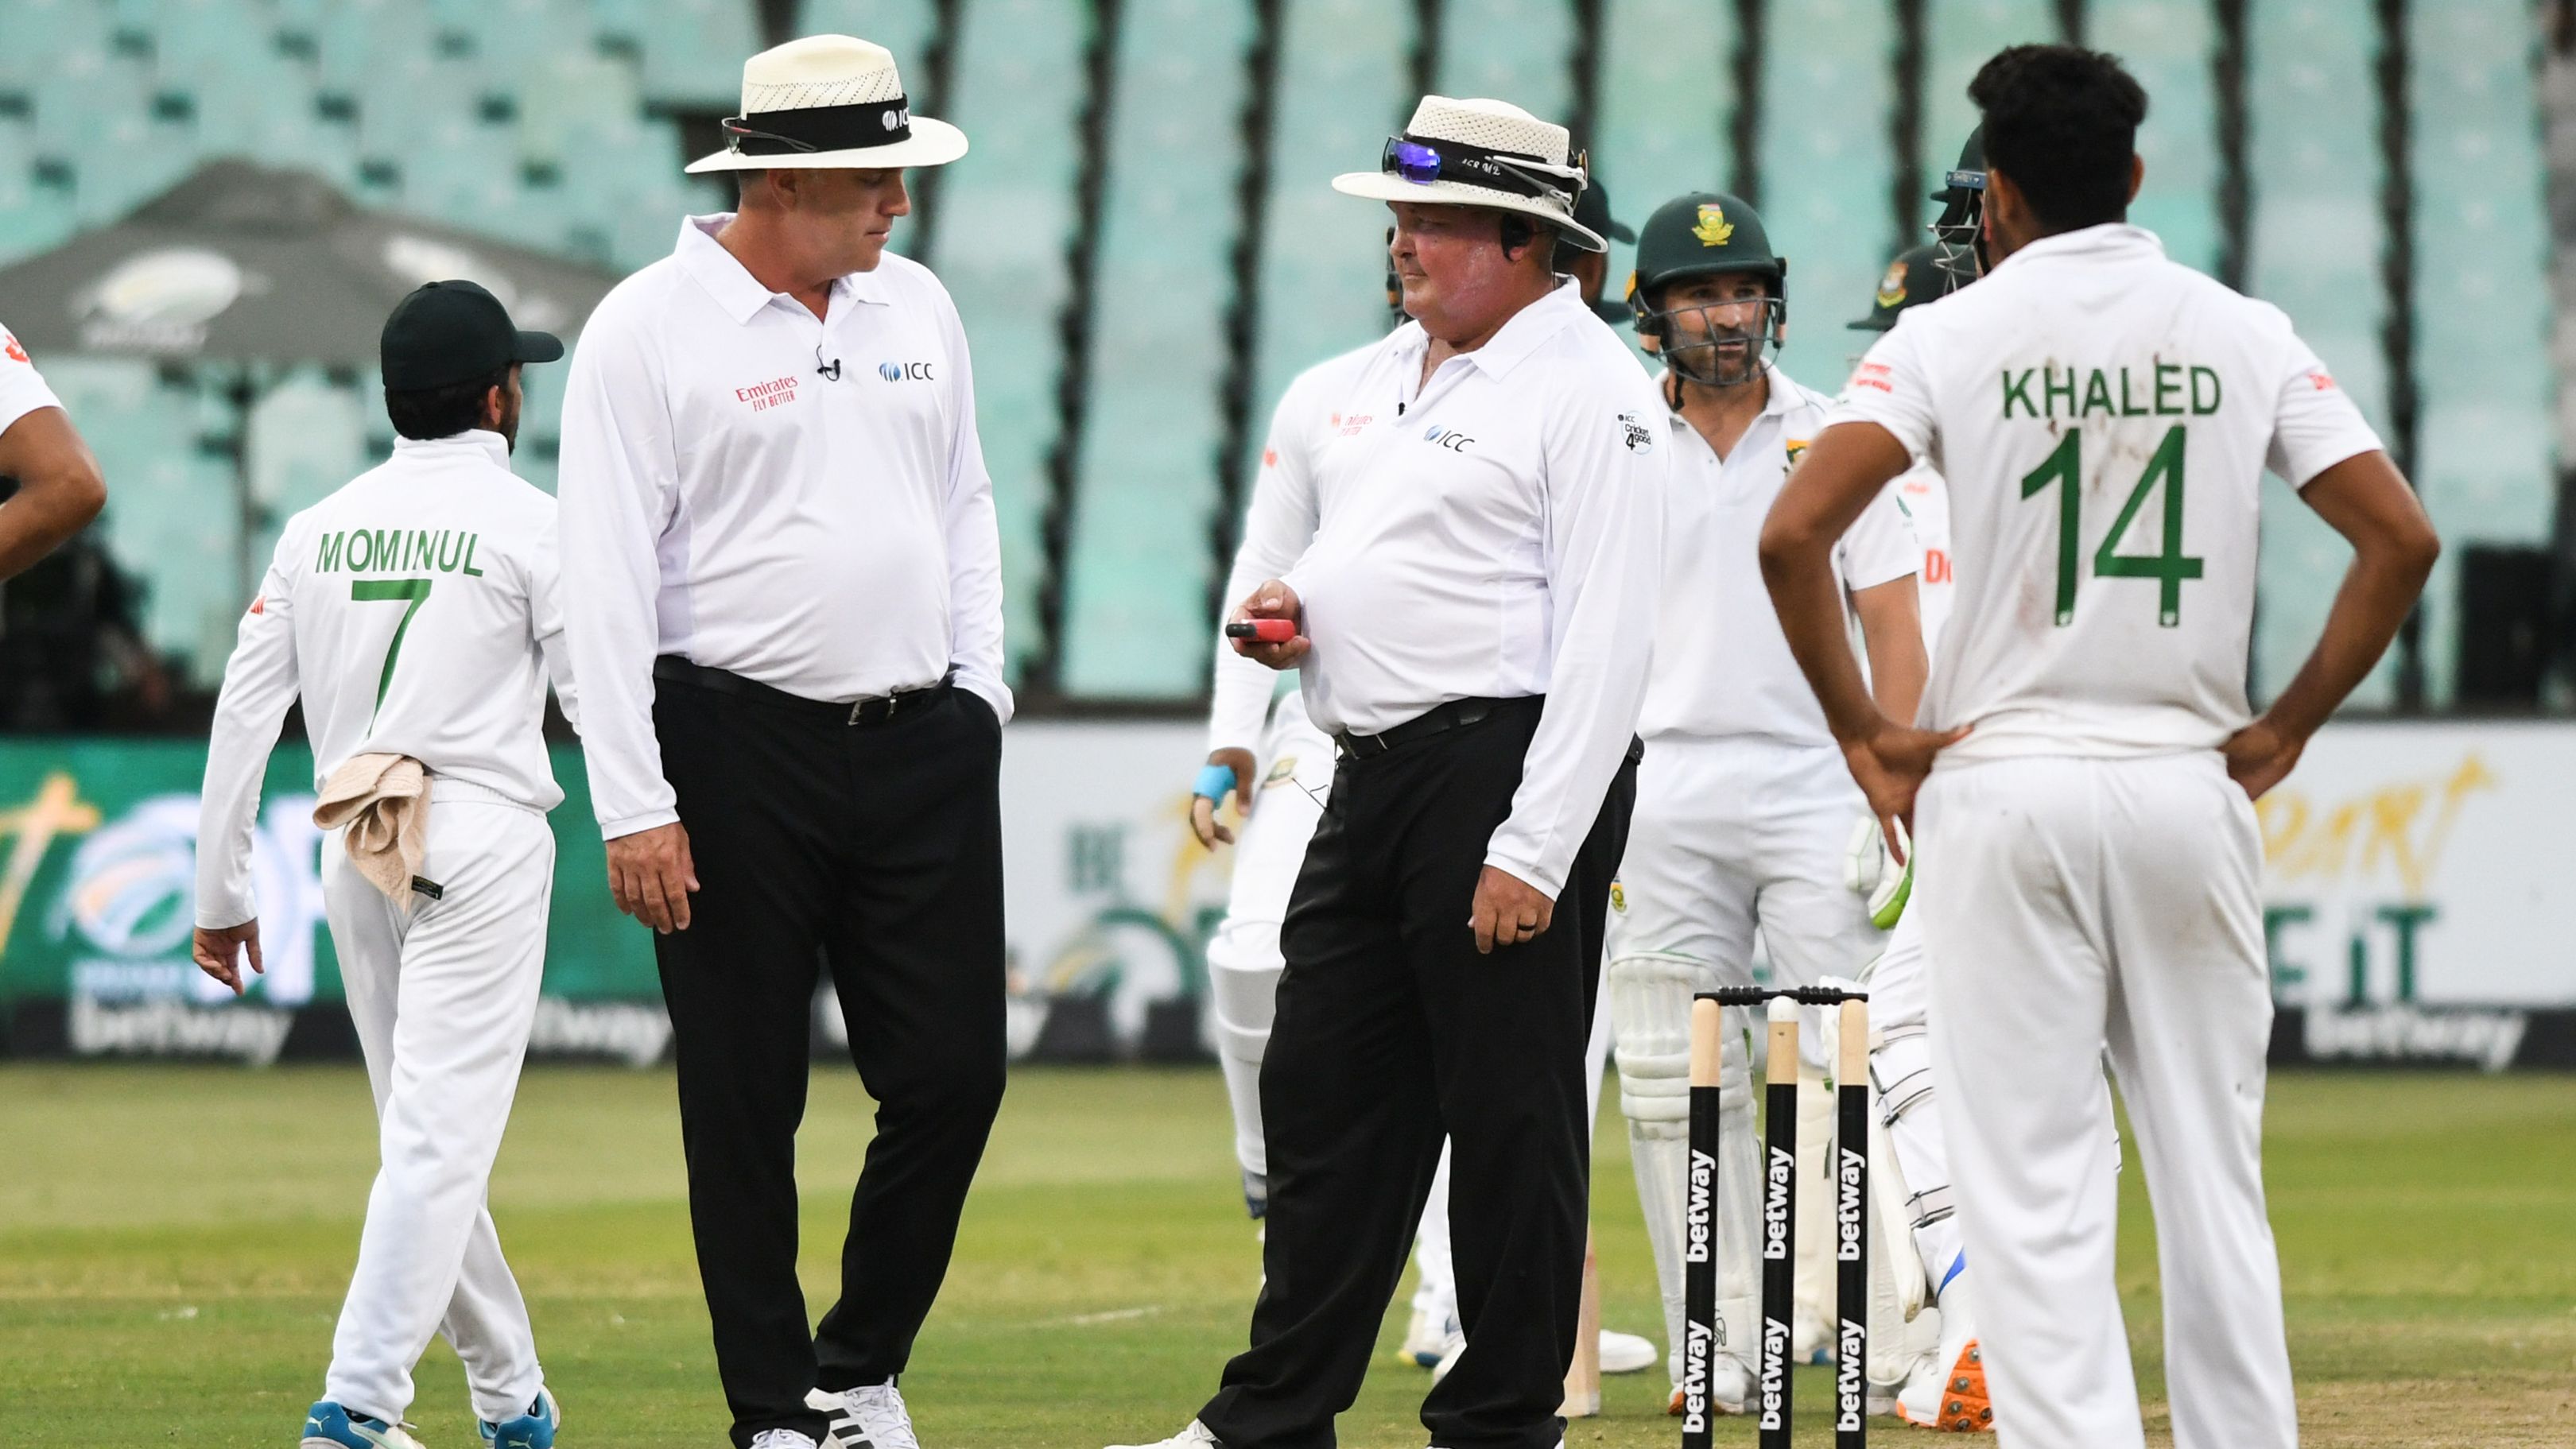 The South African umpires convene amongst themselves ahead of the resumption of play.